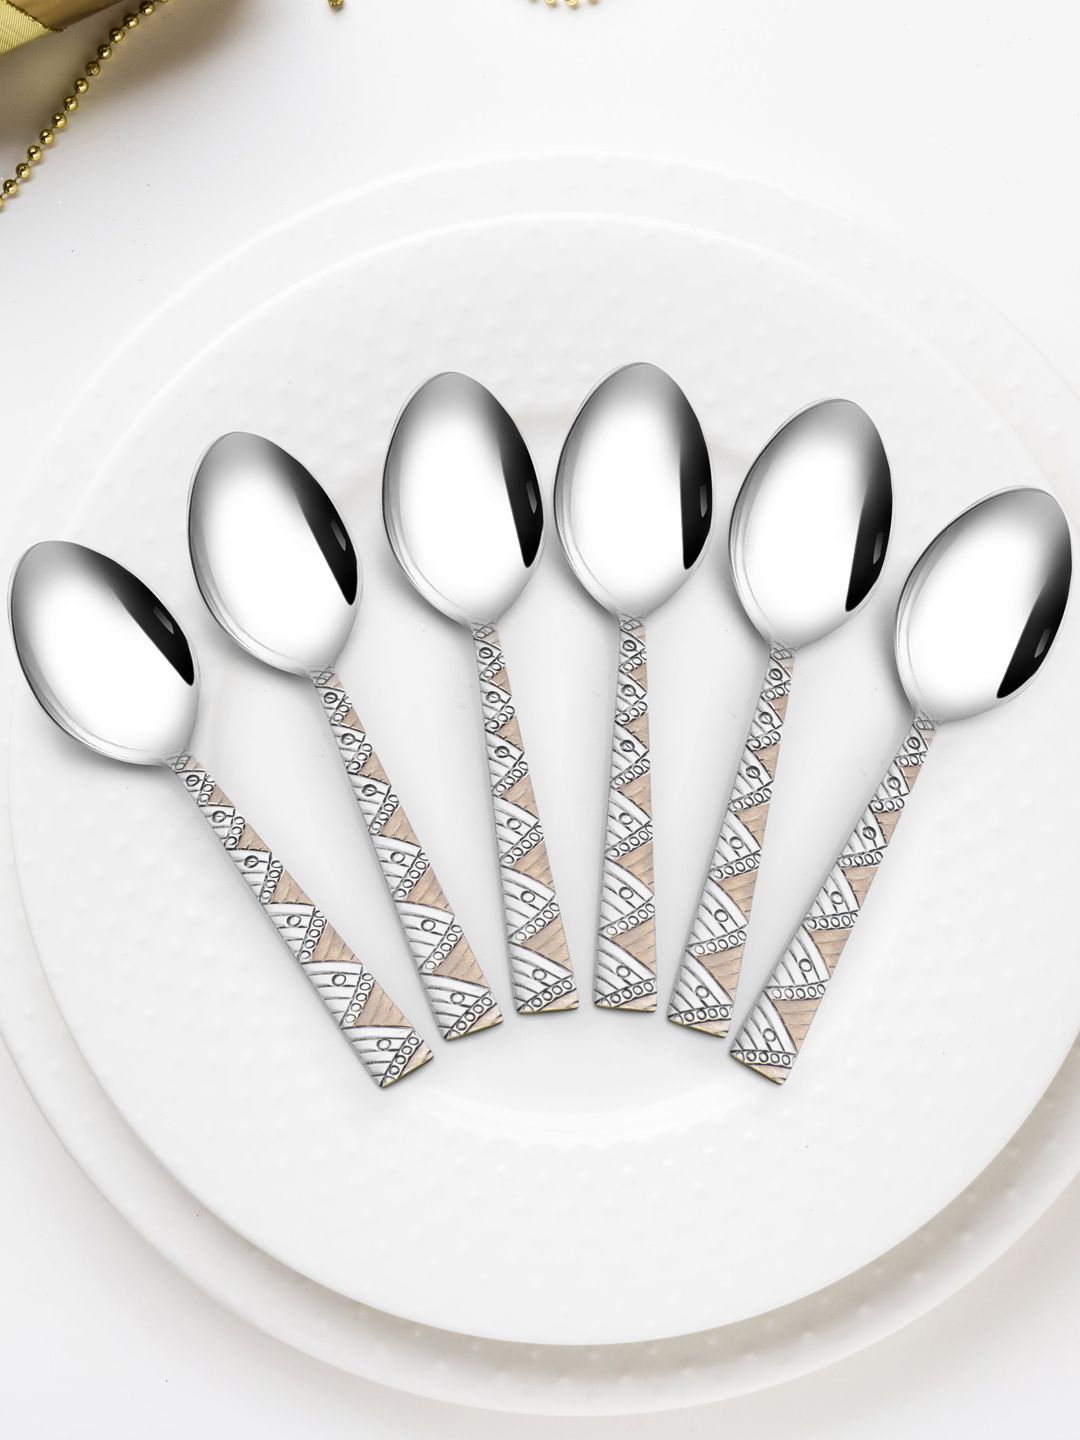 Athome by Nilkamal Silver Set Of 6 Stainless Steel Table Spoons Price in India